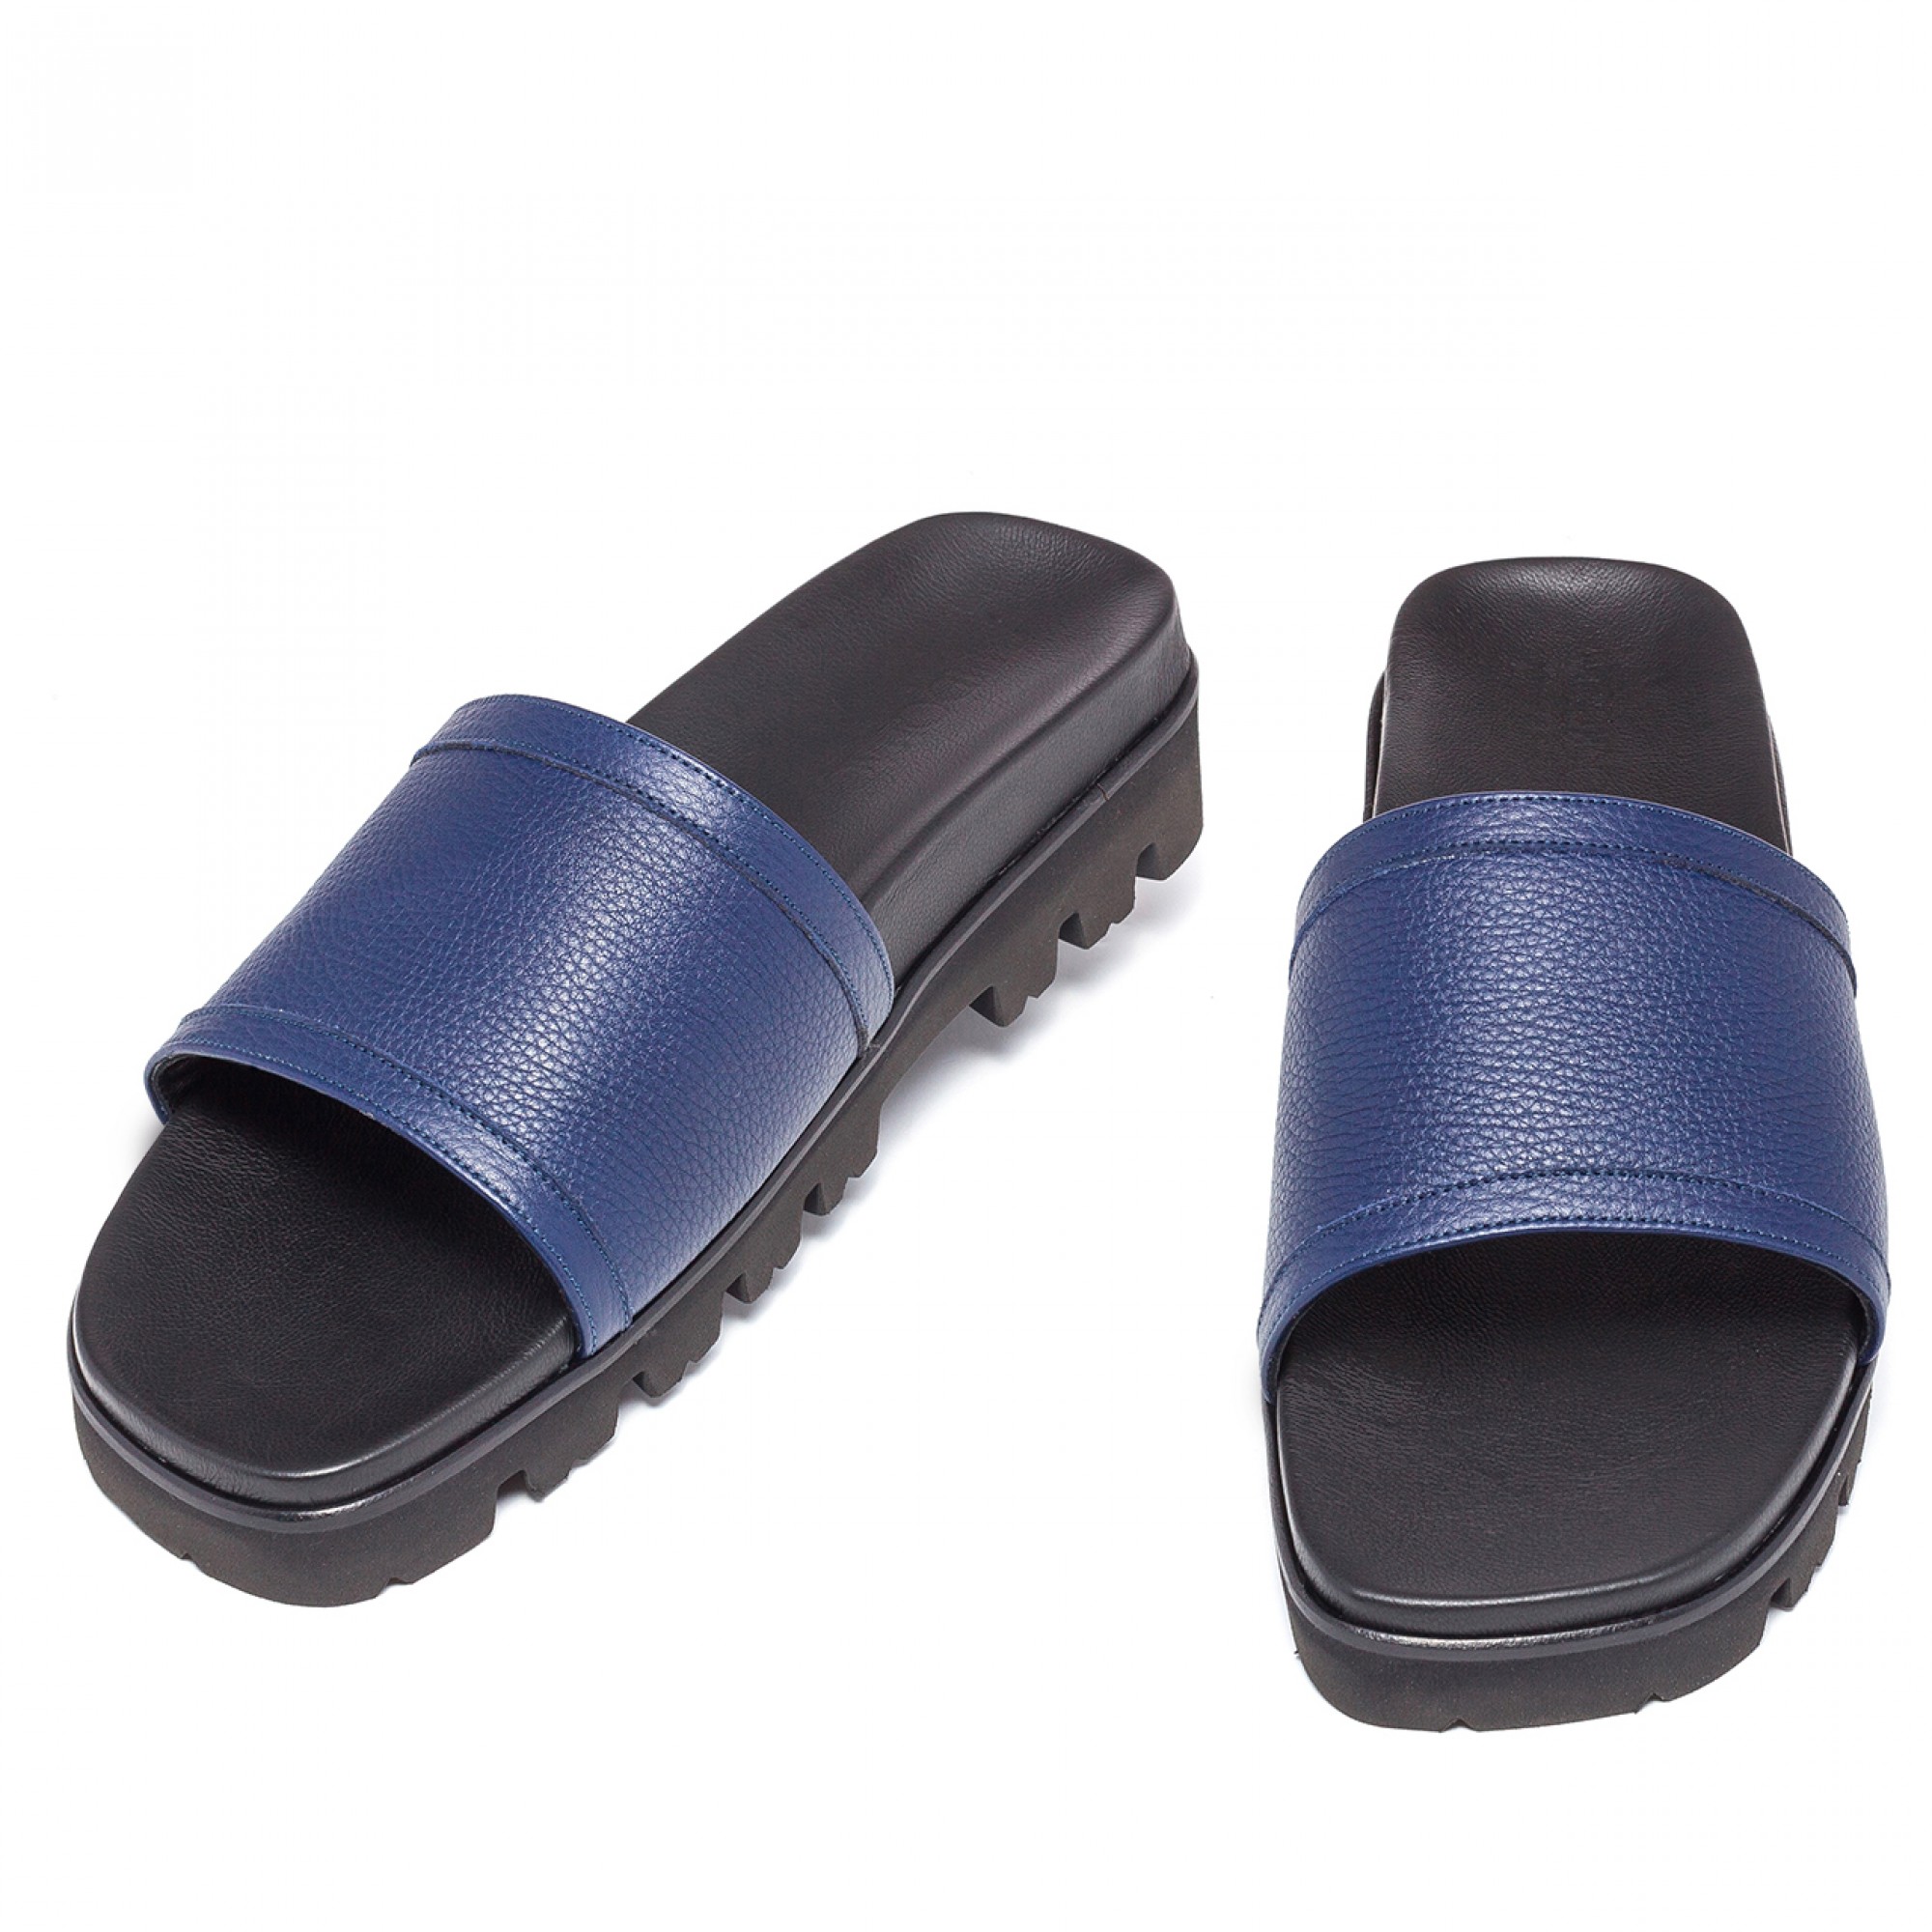 Cancún - Elevator Sandals in Full grain Leather up to 2 inches